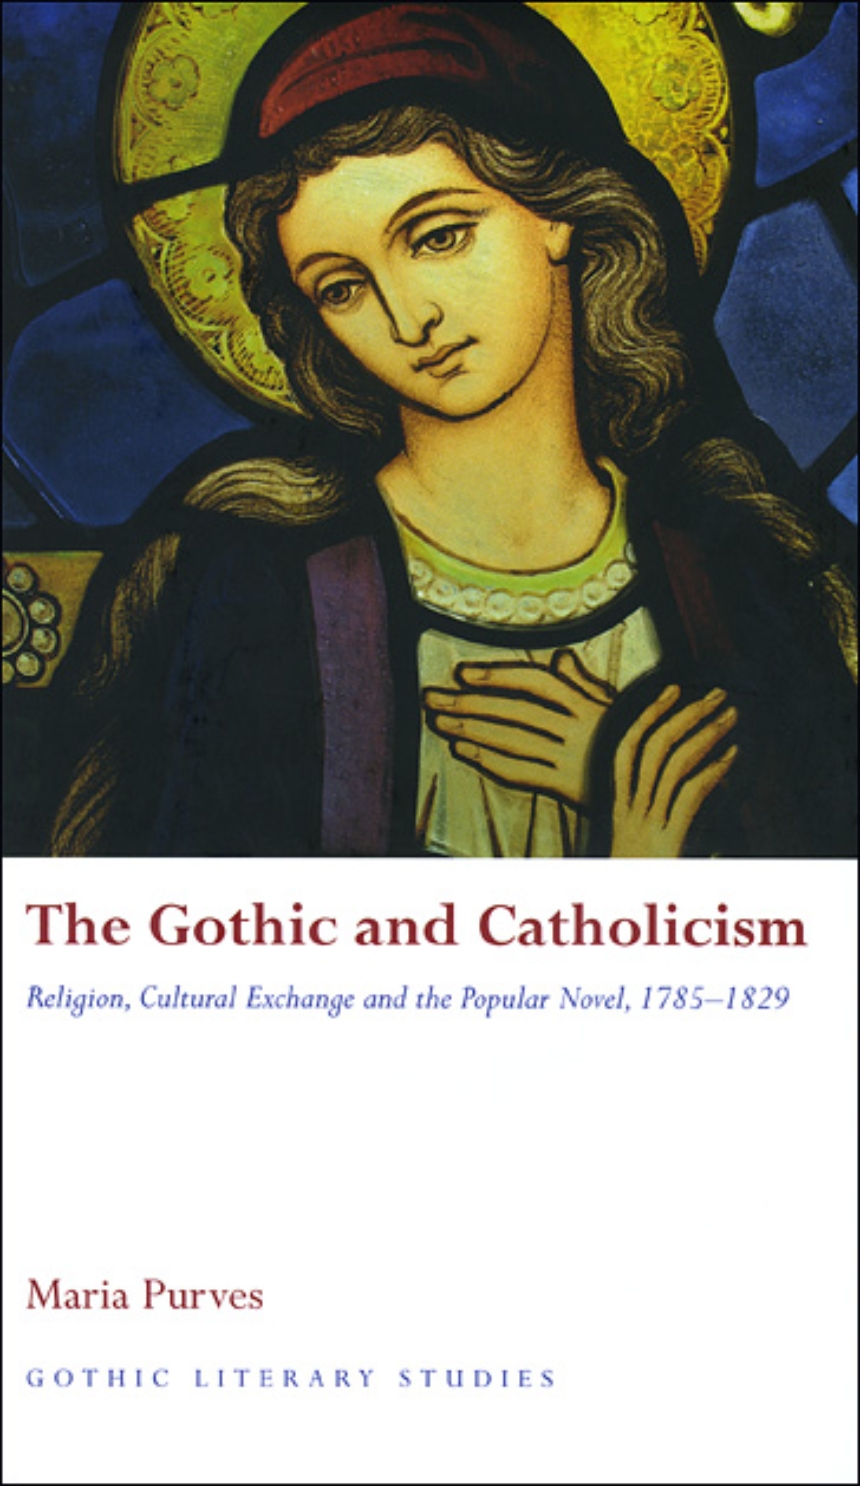 The Gothic and Catholicism